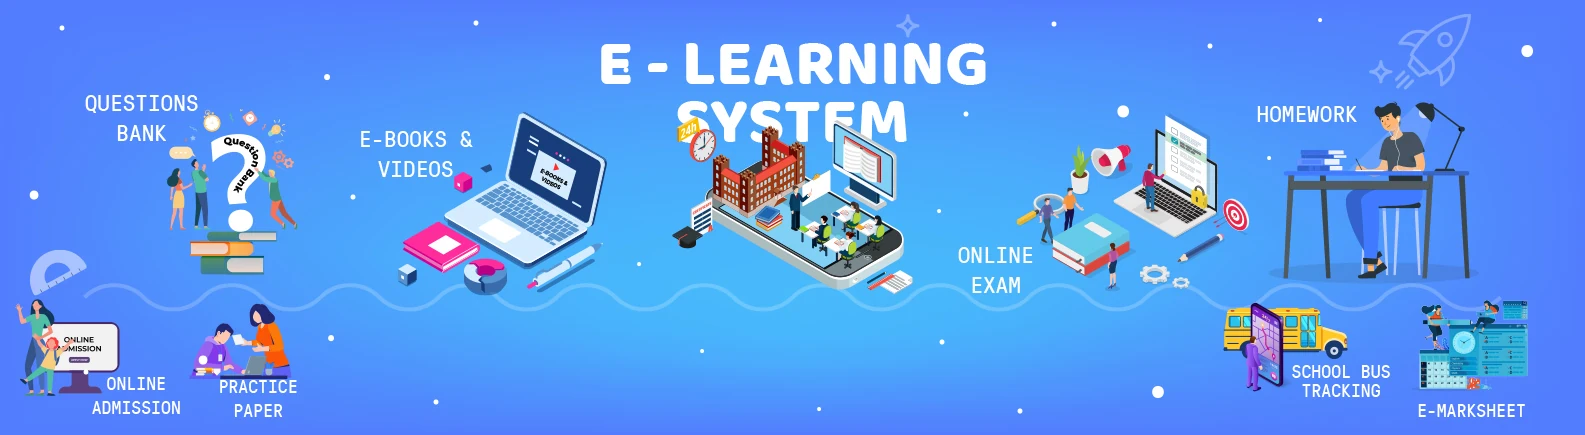 E-Learning System slider image of paatham, in which vector image of laptop, books, school smart phone, school bus, marksheet, men, women, mother with kid, study table